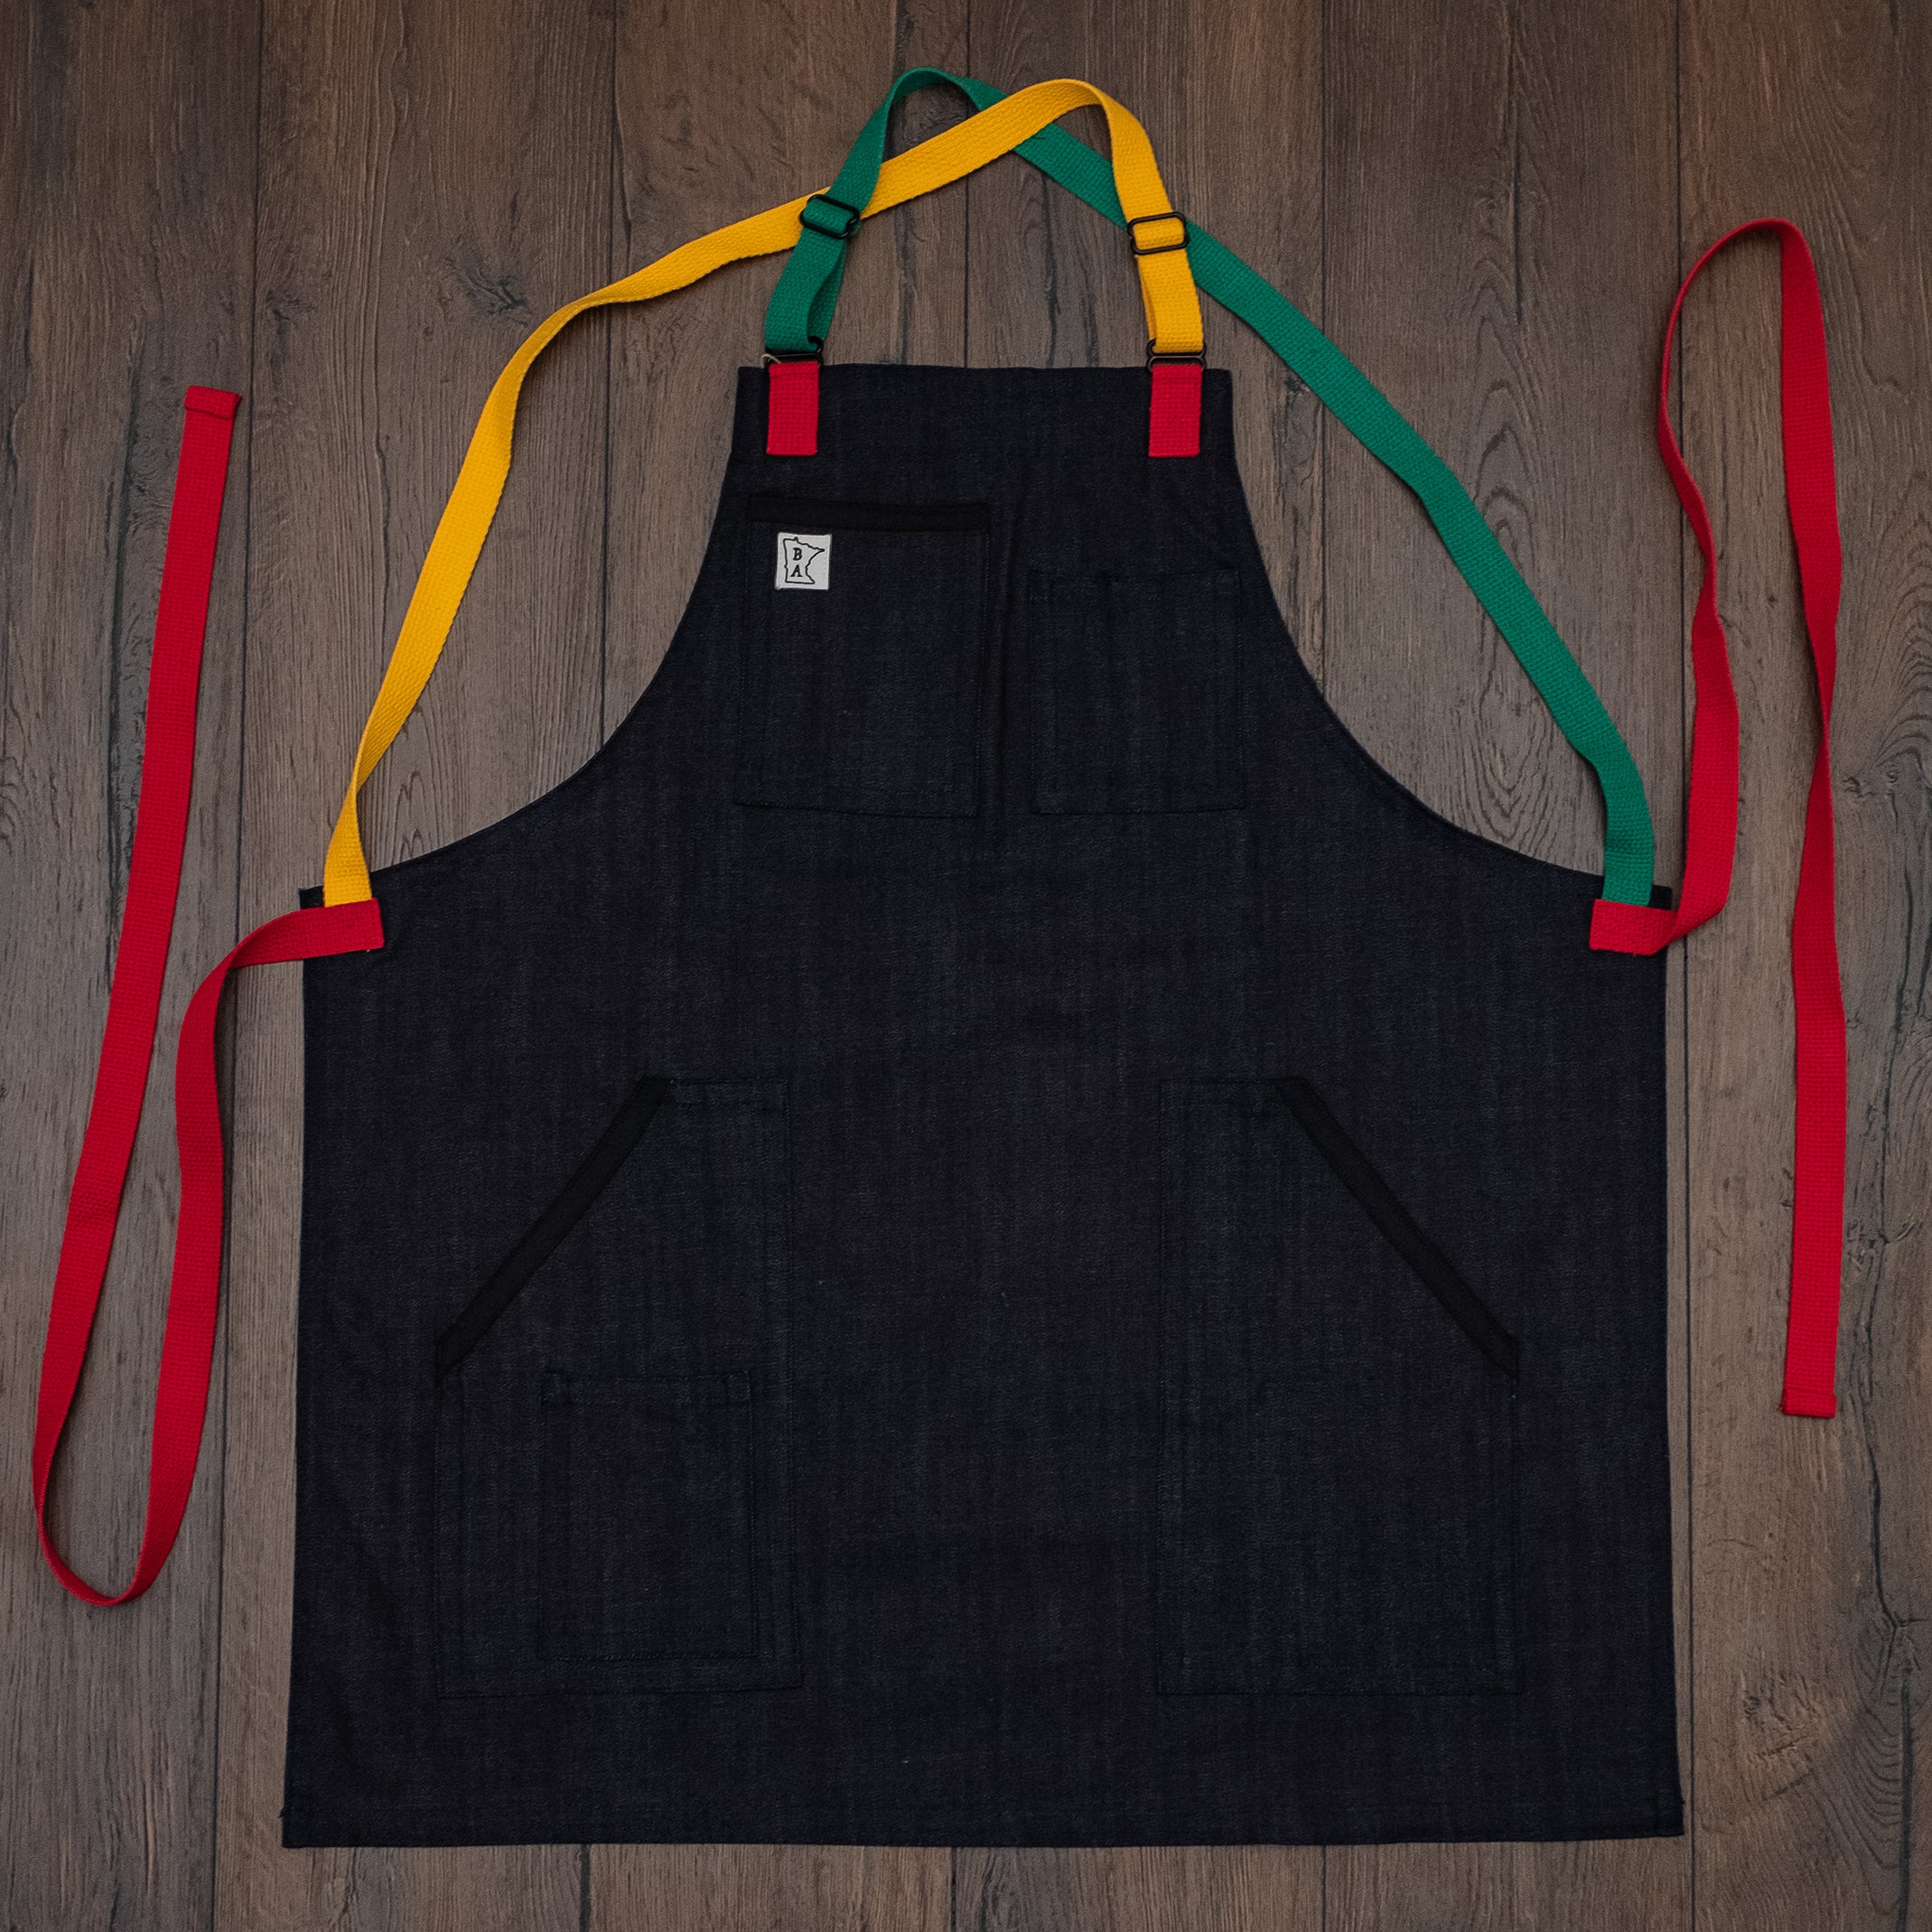 Denim apron with black trimmed pockets and red, green, and yellow strapping laid out flat on a wooden surface. Design Marley by Craftmade Aprons, based in Minnesota.